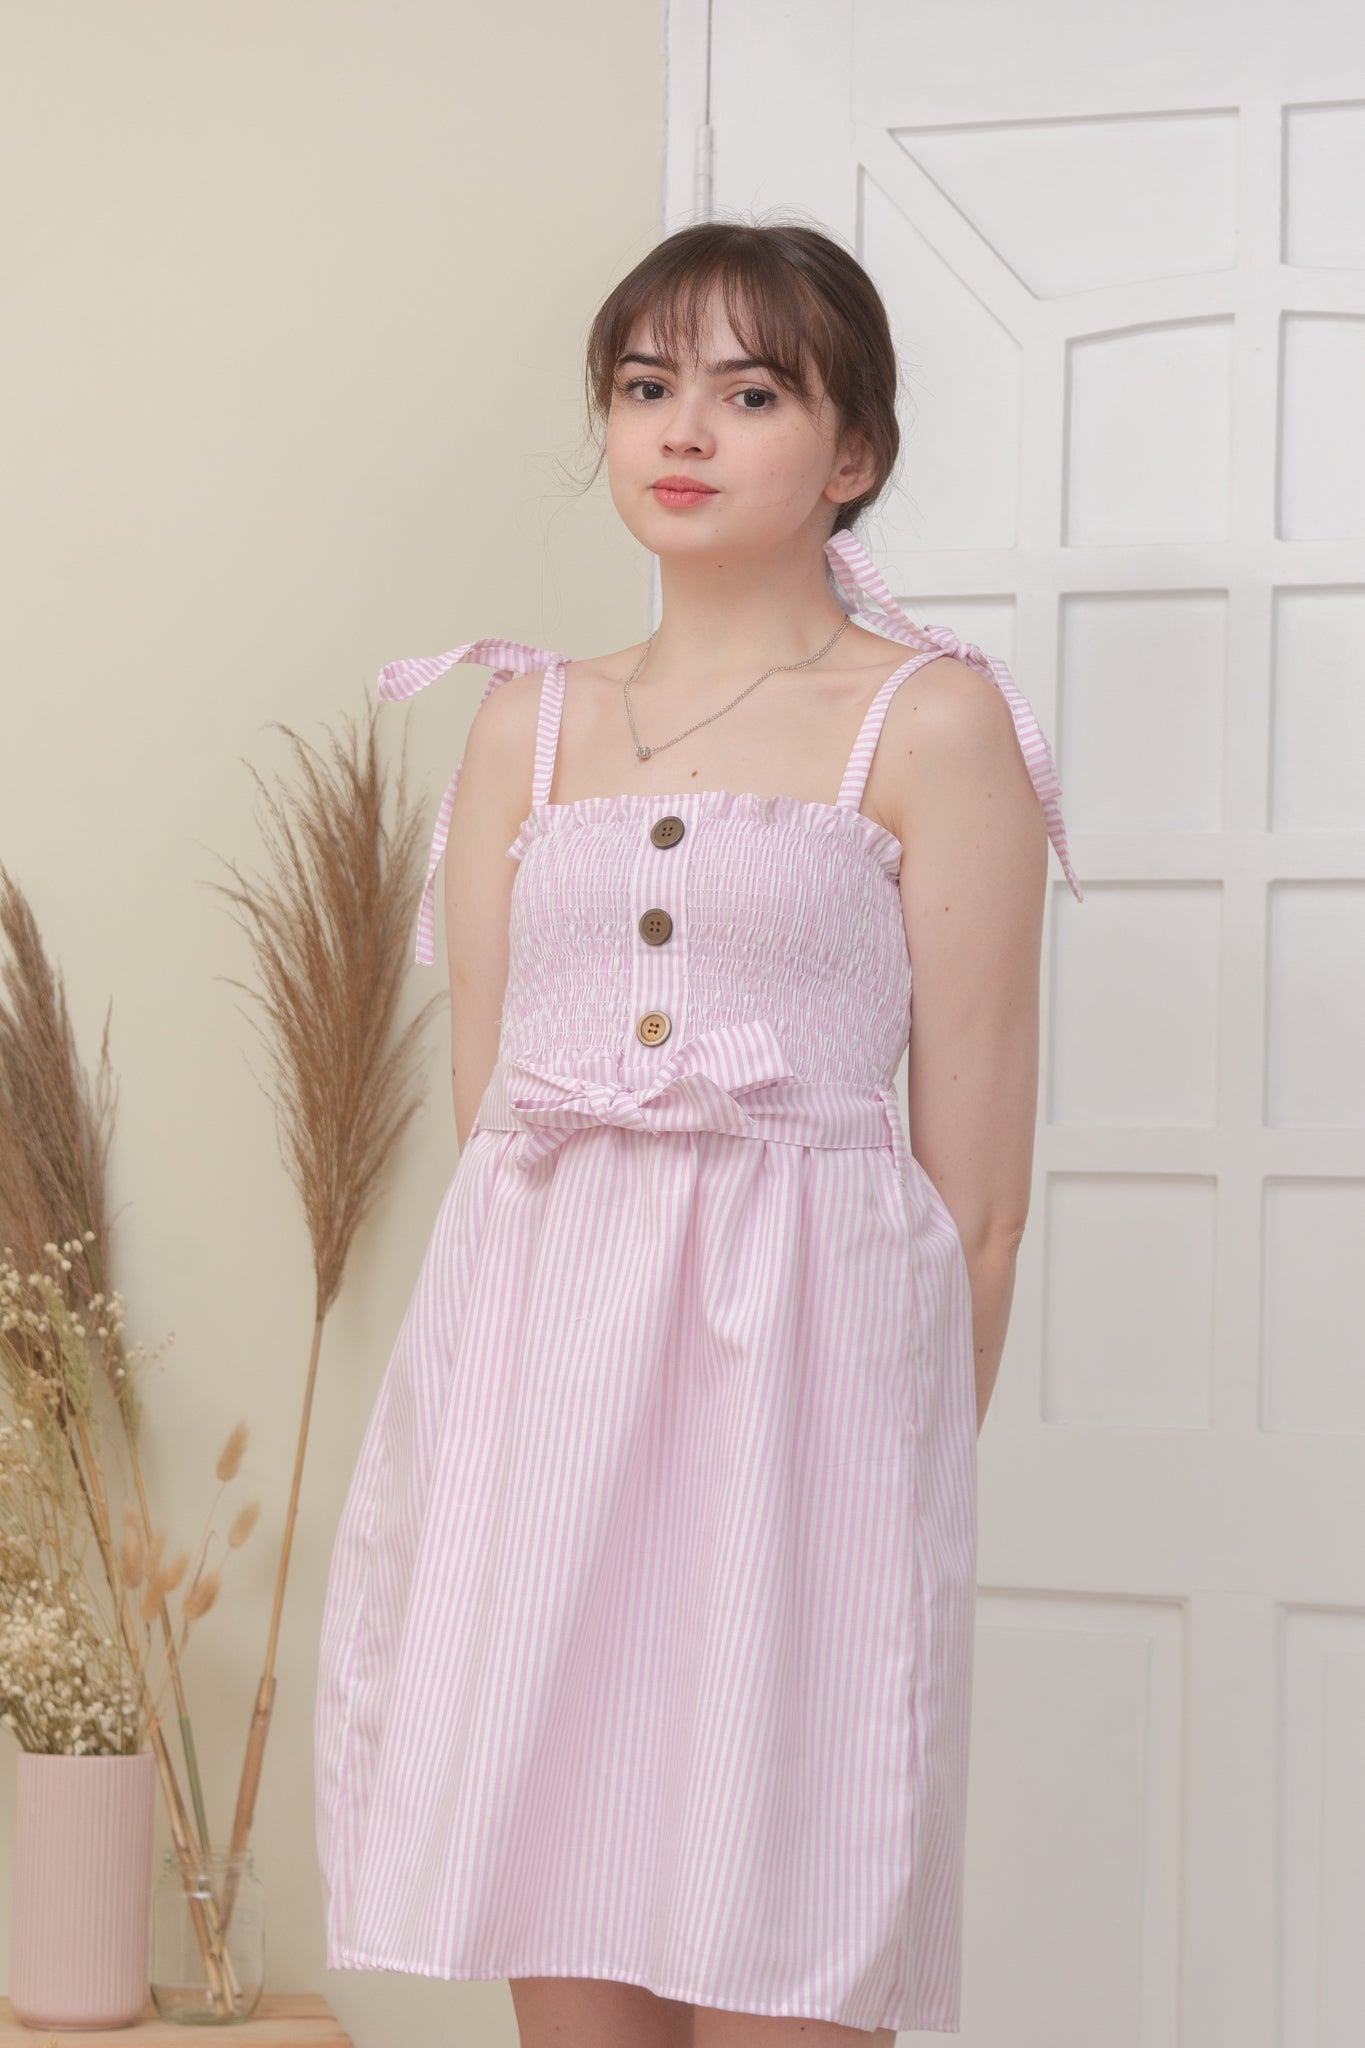 WAVERLY DRESS IN PINK